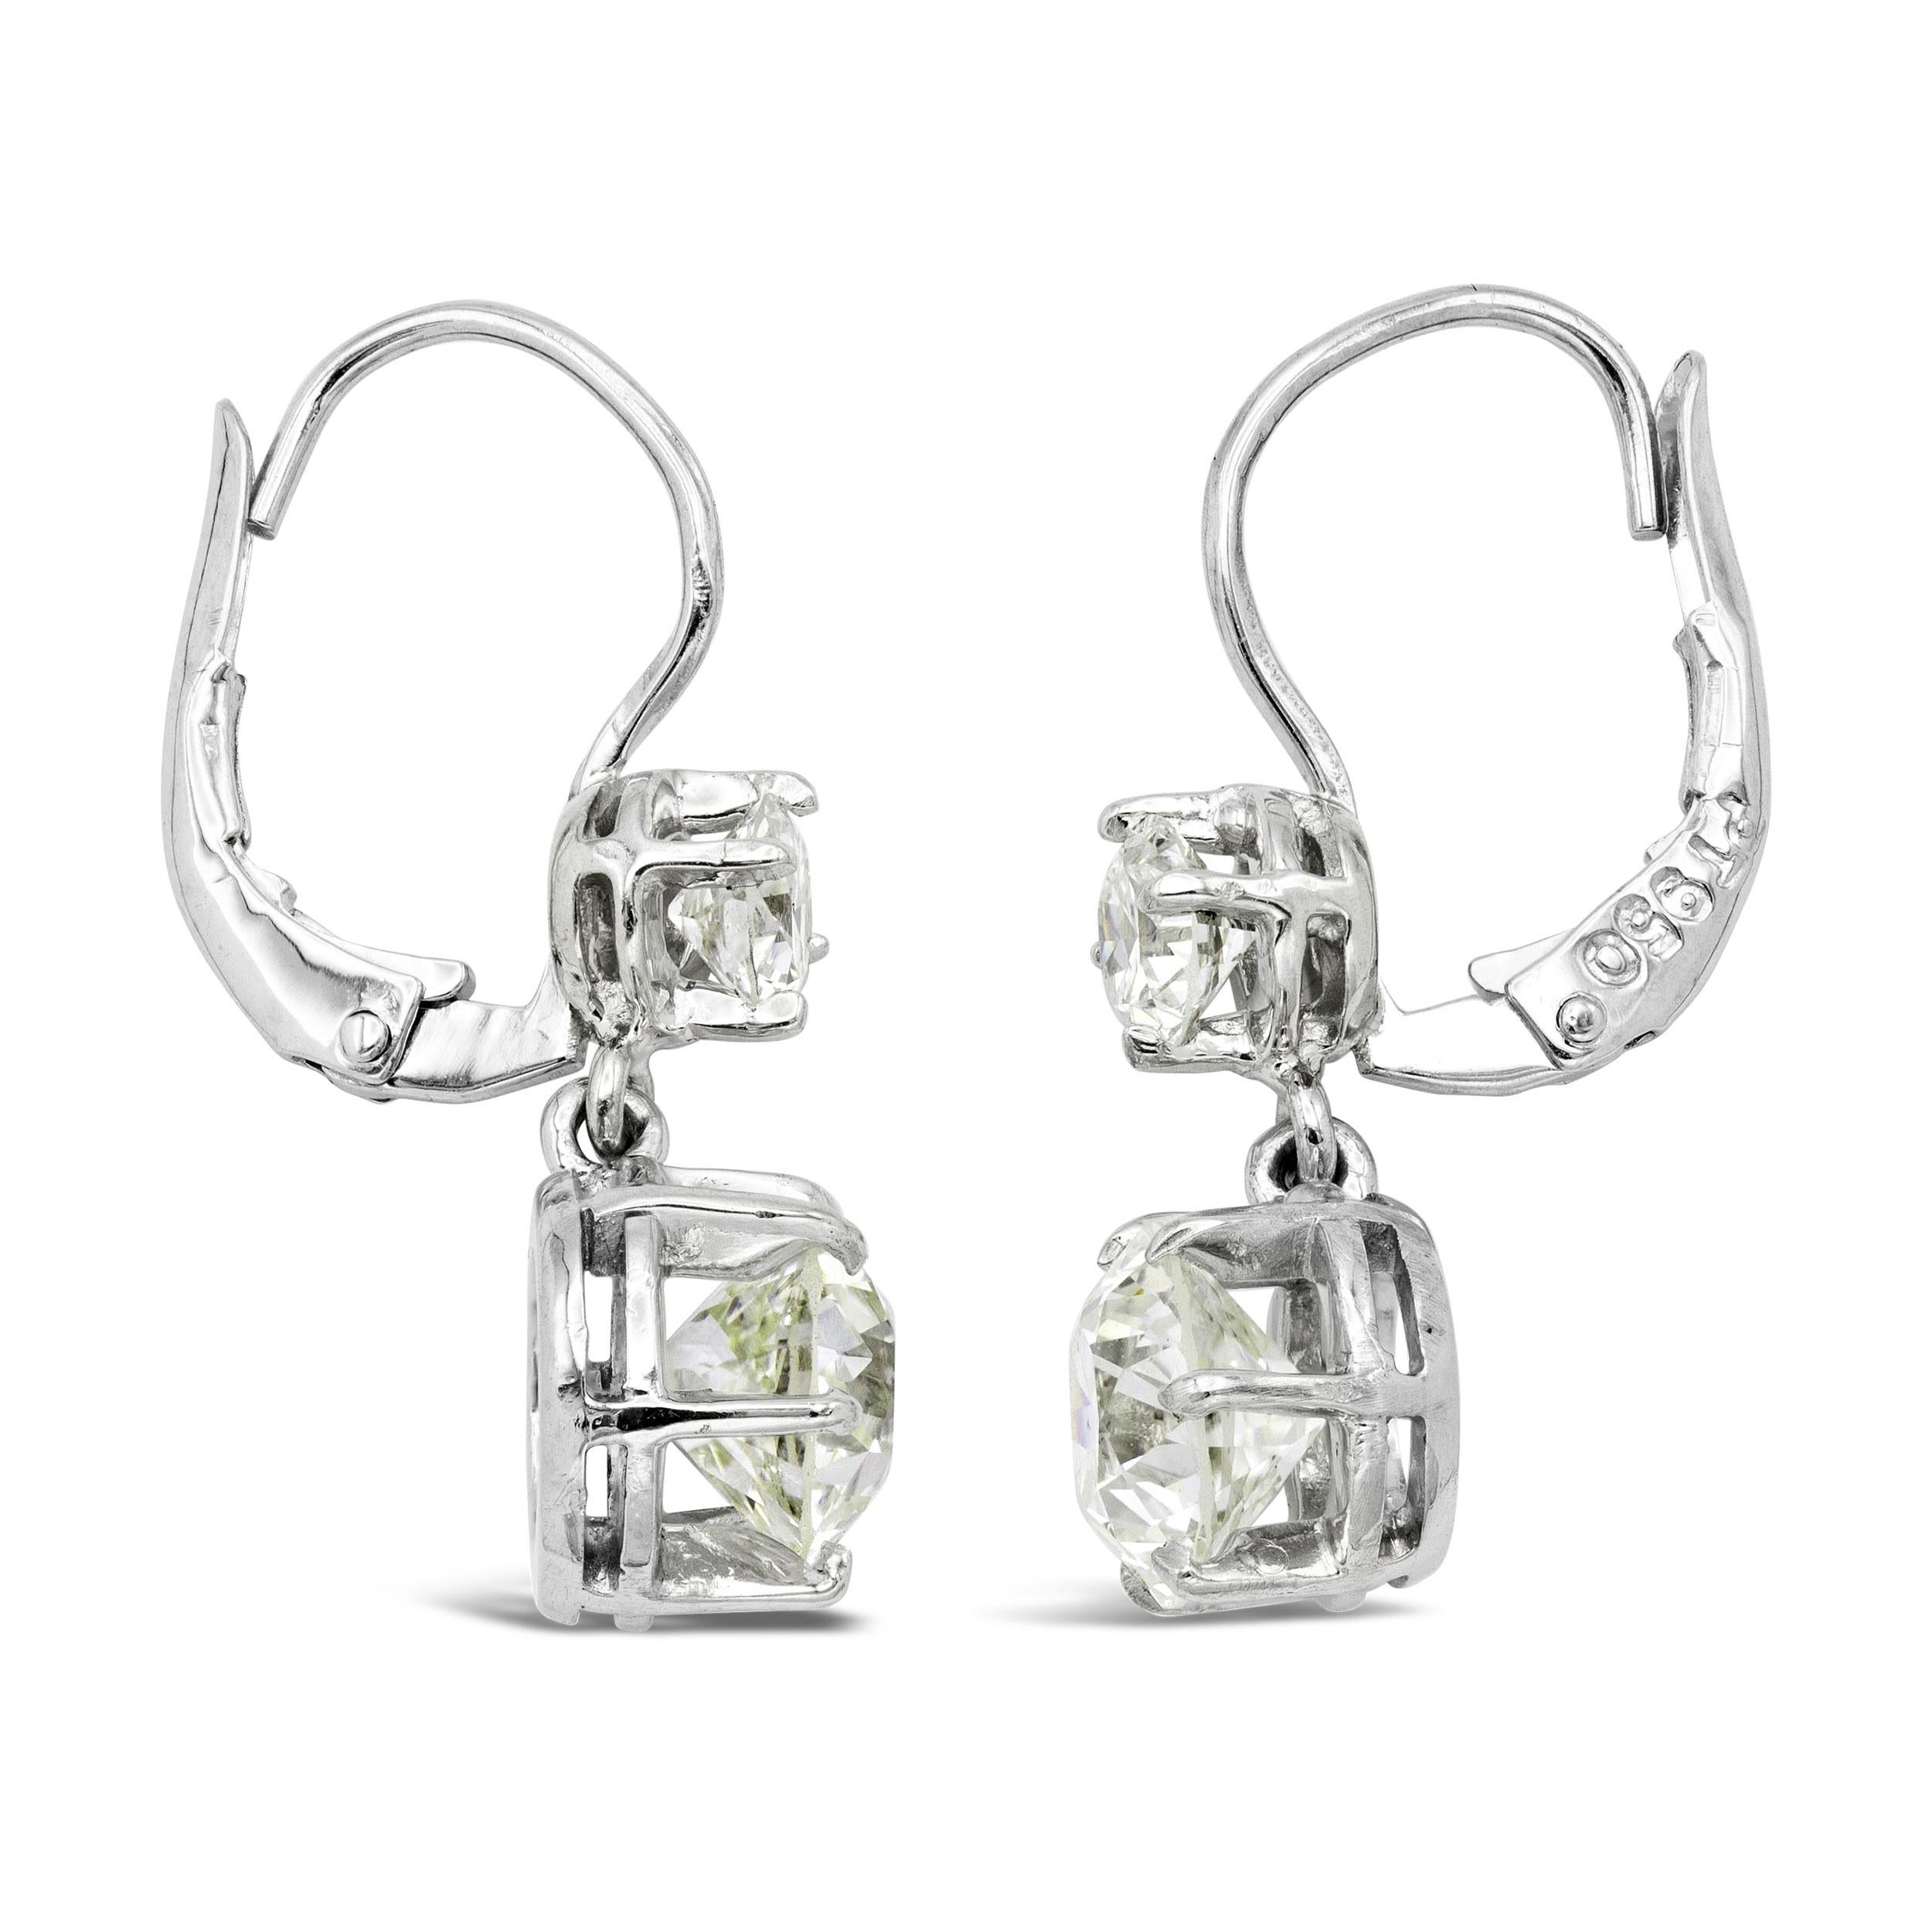 The perfect pair of earrings to take you from day, to night. Set with a pair of sweet old Euros, these drop earrings have the most charming look and sparkle on the ear in such a beautiful way. Everyone needs a pair of diamond earrings, and these are